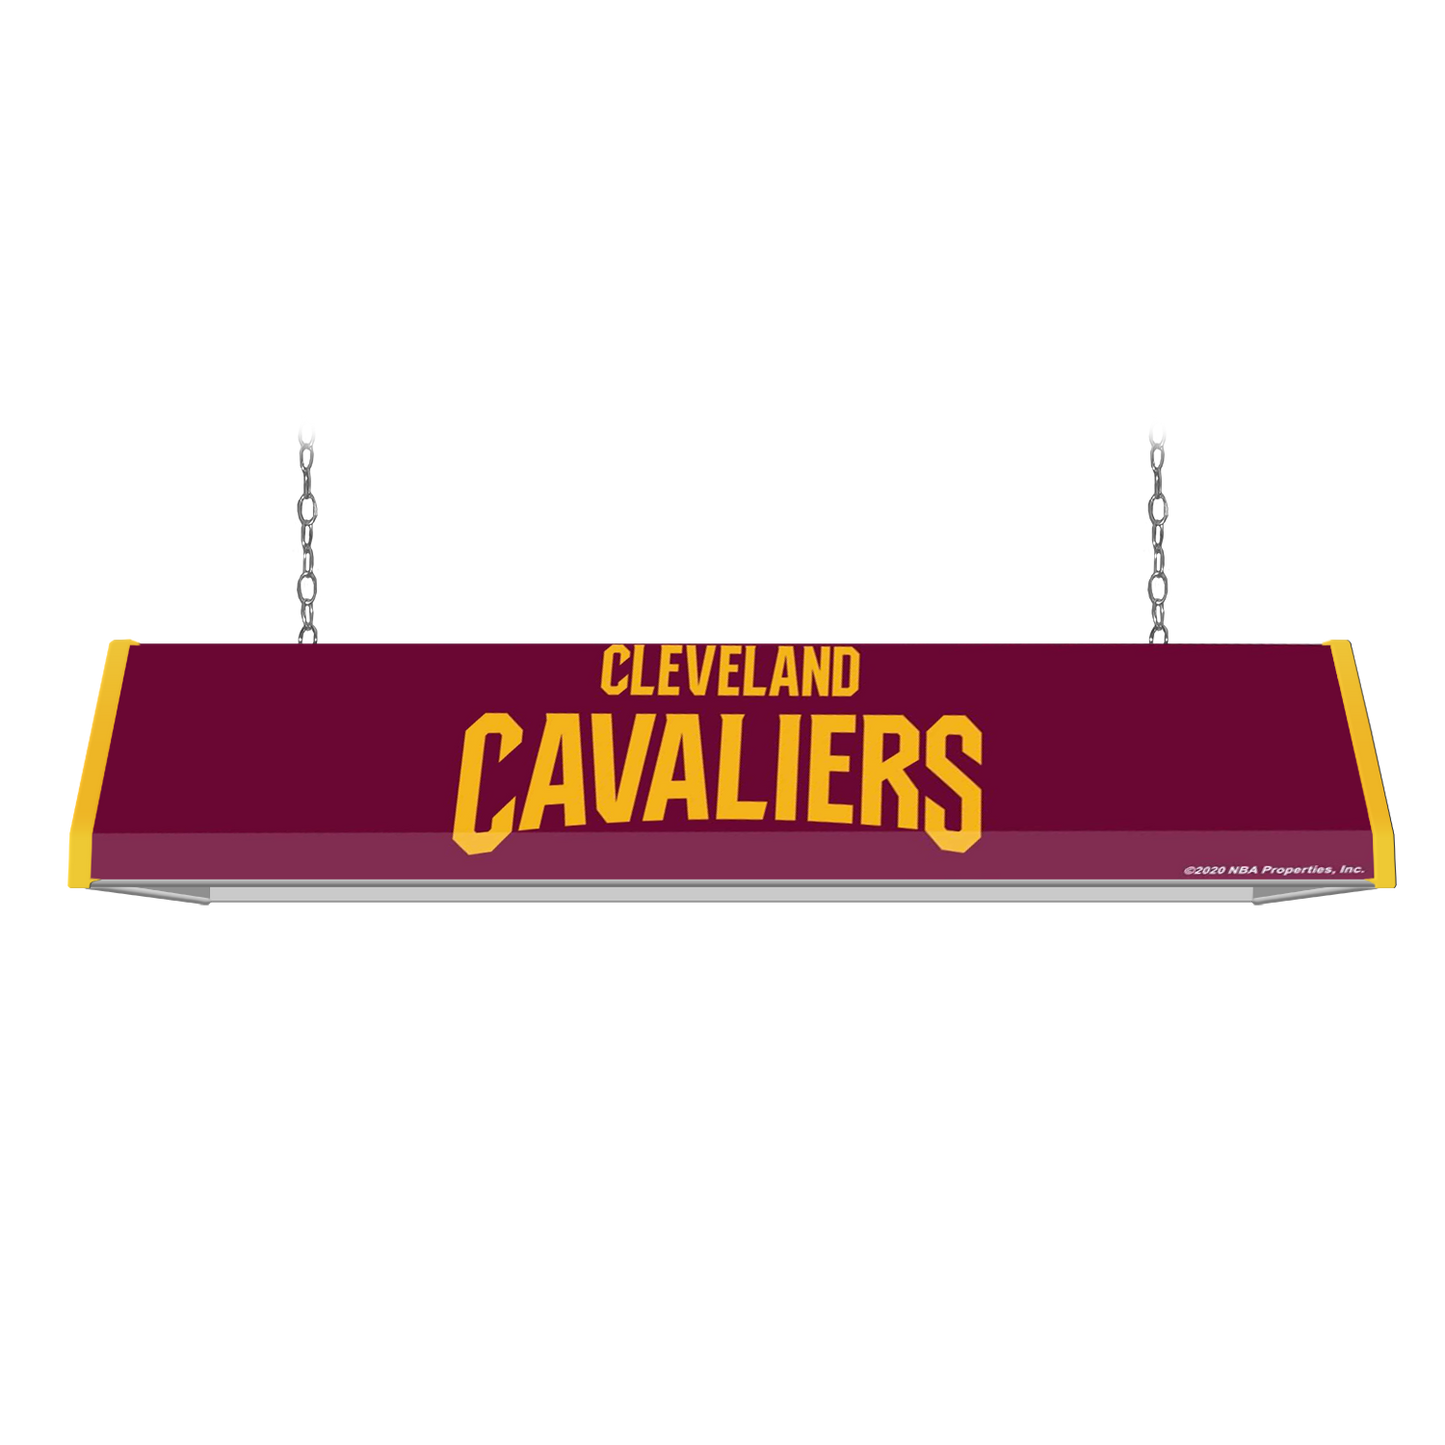 Cleveland Cavaliers: Standard Pool Table Light - The Fan-Brand